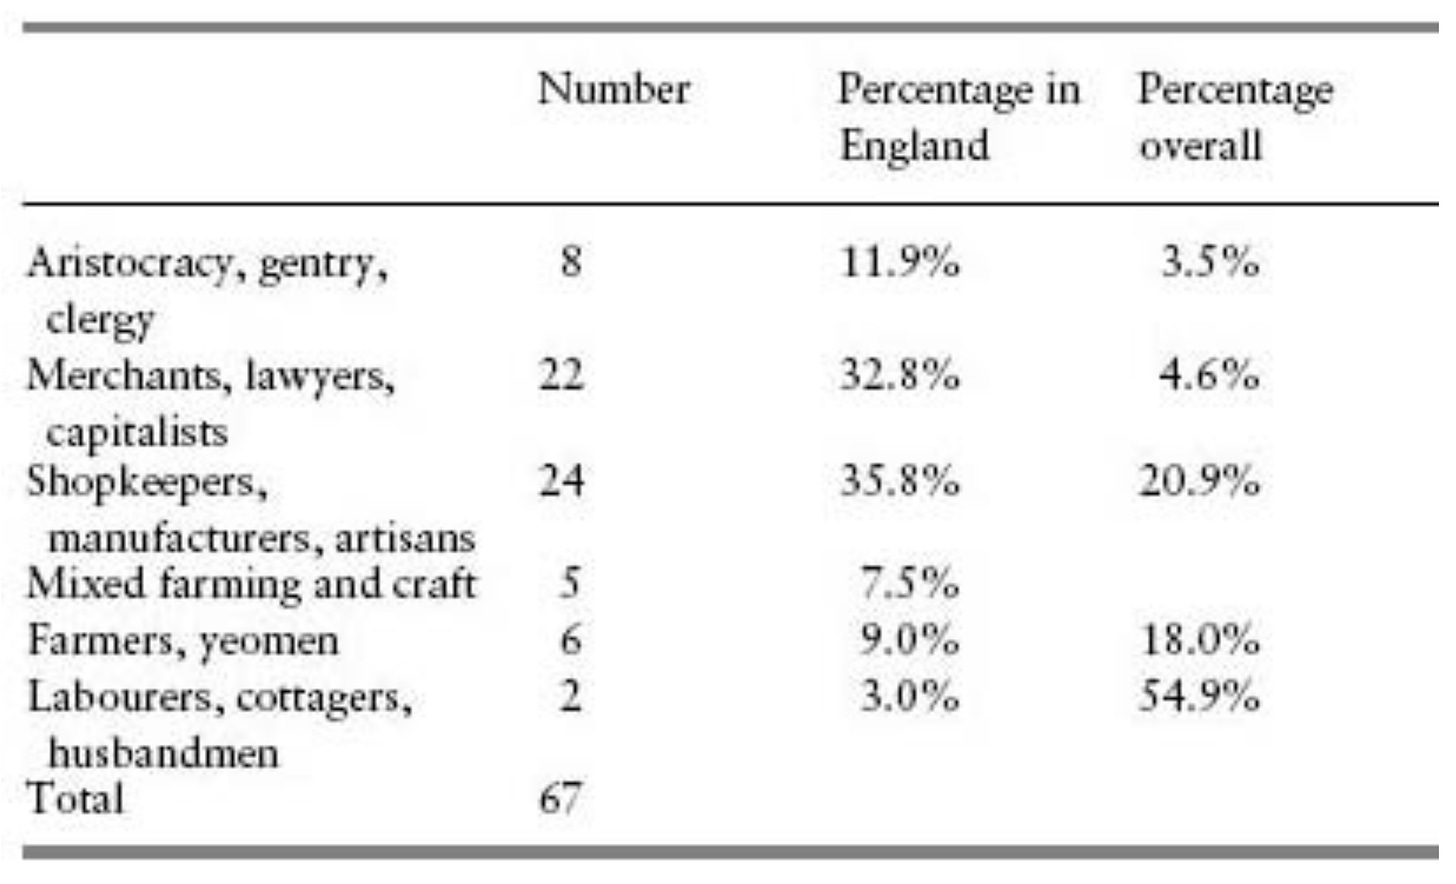 Table 10.4. Important inventors: father’s occupation. Note that the column names are confusing and might be simply mistaken: the column labeled “Percentage in England” is just the number of inventors divided by the total number whose fathers' occupation could be ascertained; “Percentage overall” is actually the size of that class within the English population. I don't know why the last column adds up to 101.9%, though.